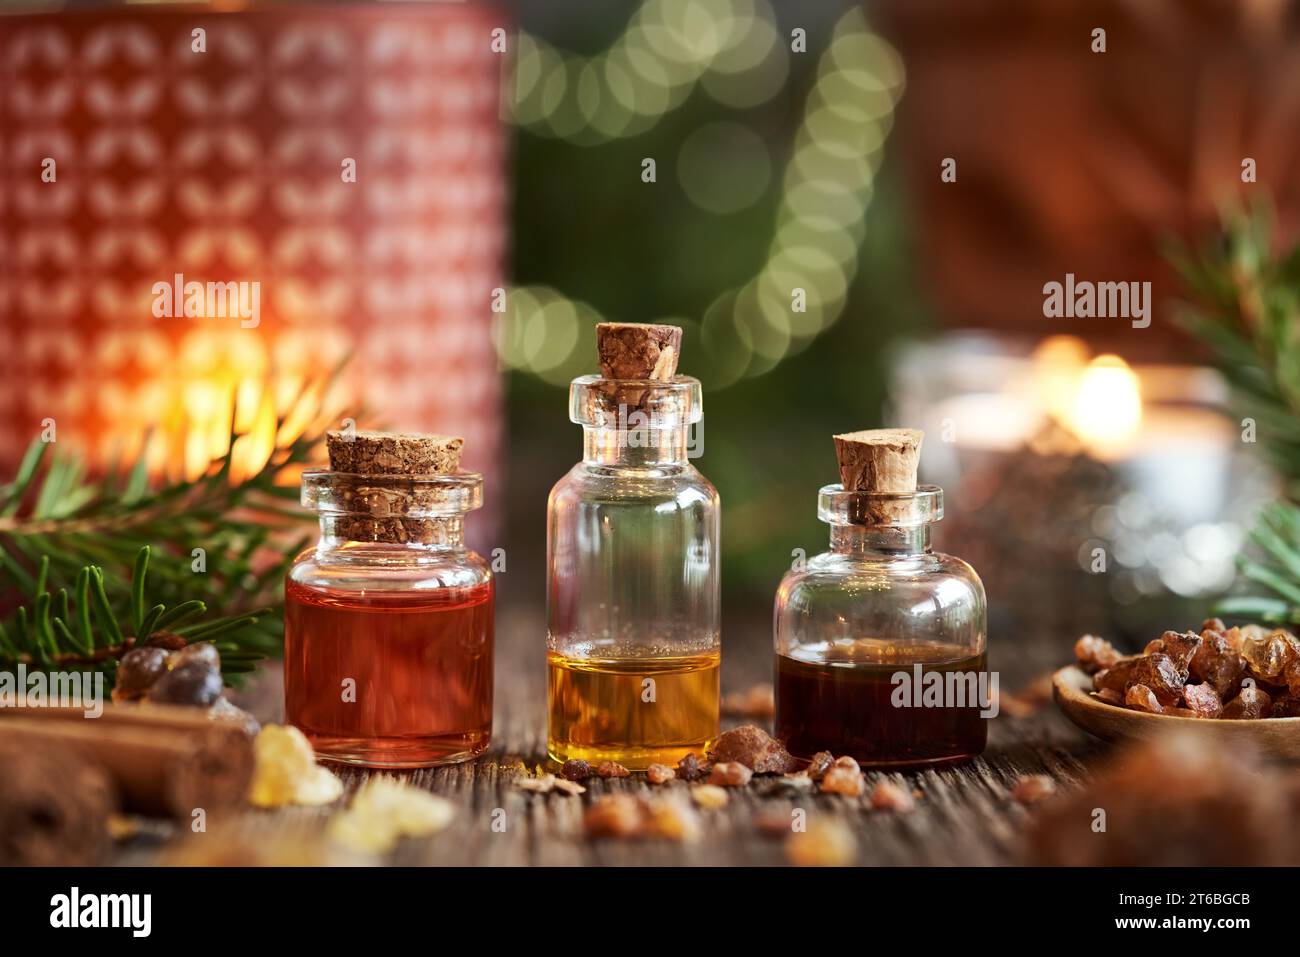 Christmas selection of essential oils with frankincense, myrrh, cinnamon and spruce tree branches Stock Photo